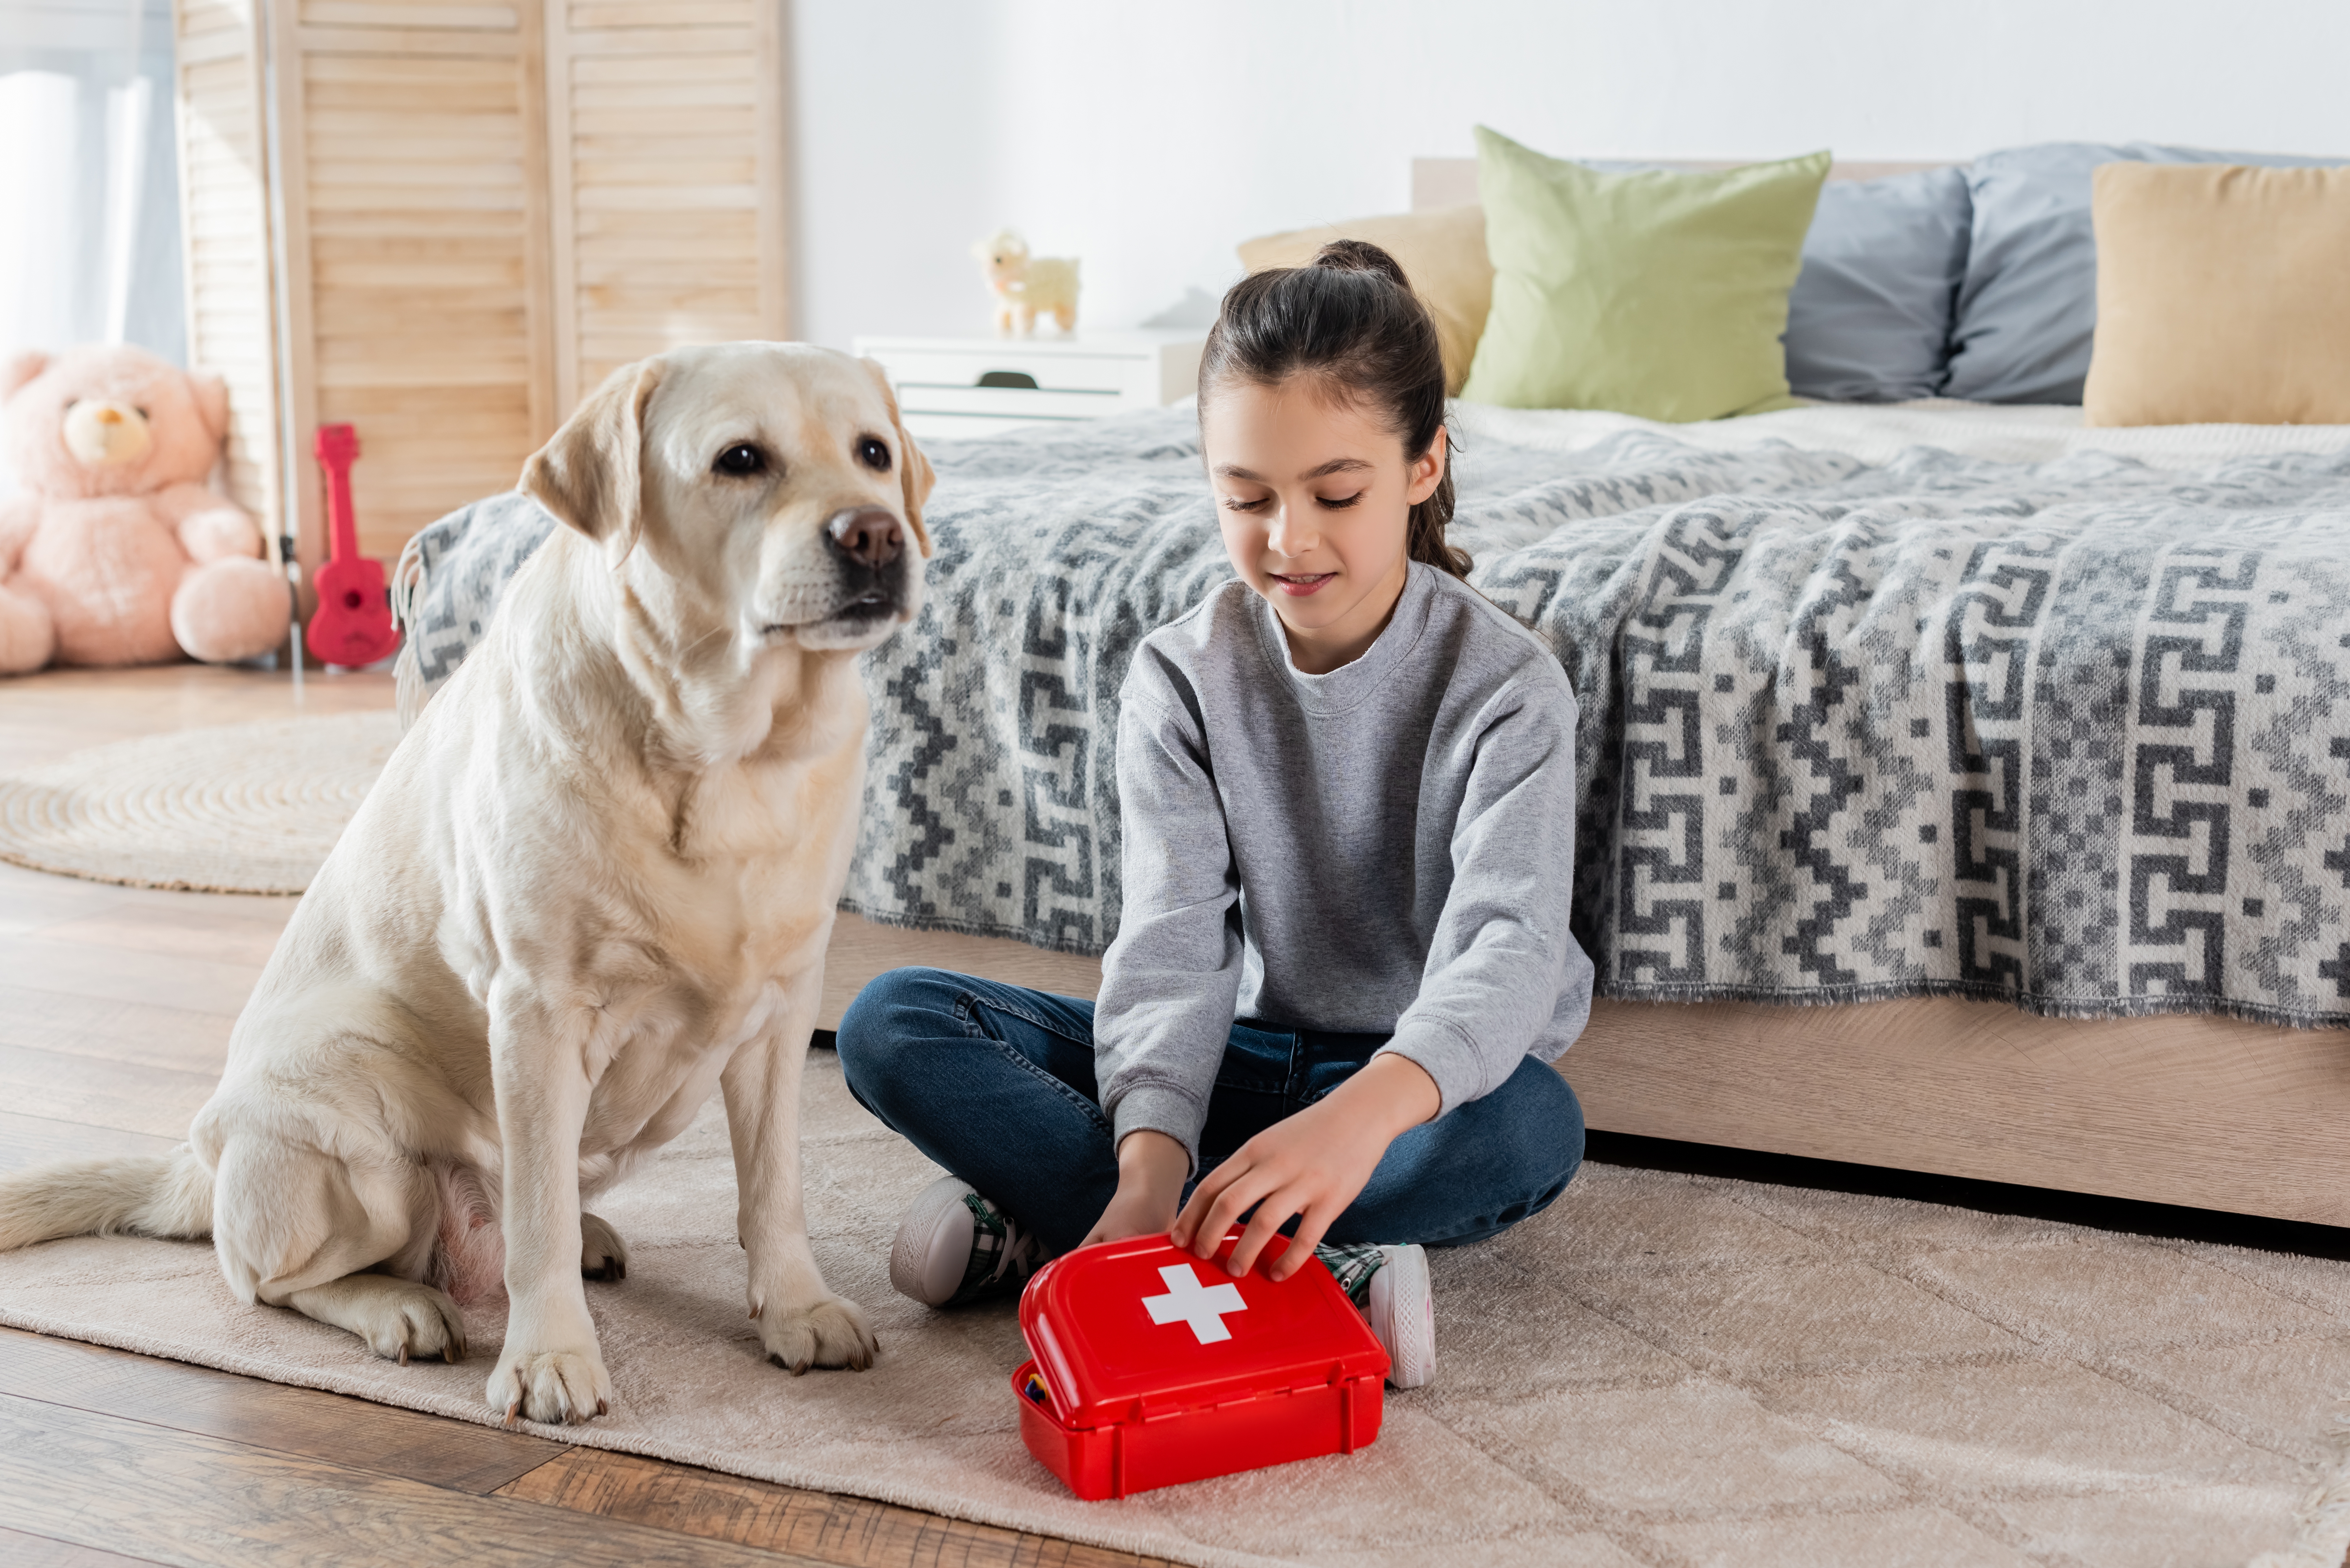 Young girl opening a first aid kit while her dog sits next to her